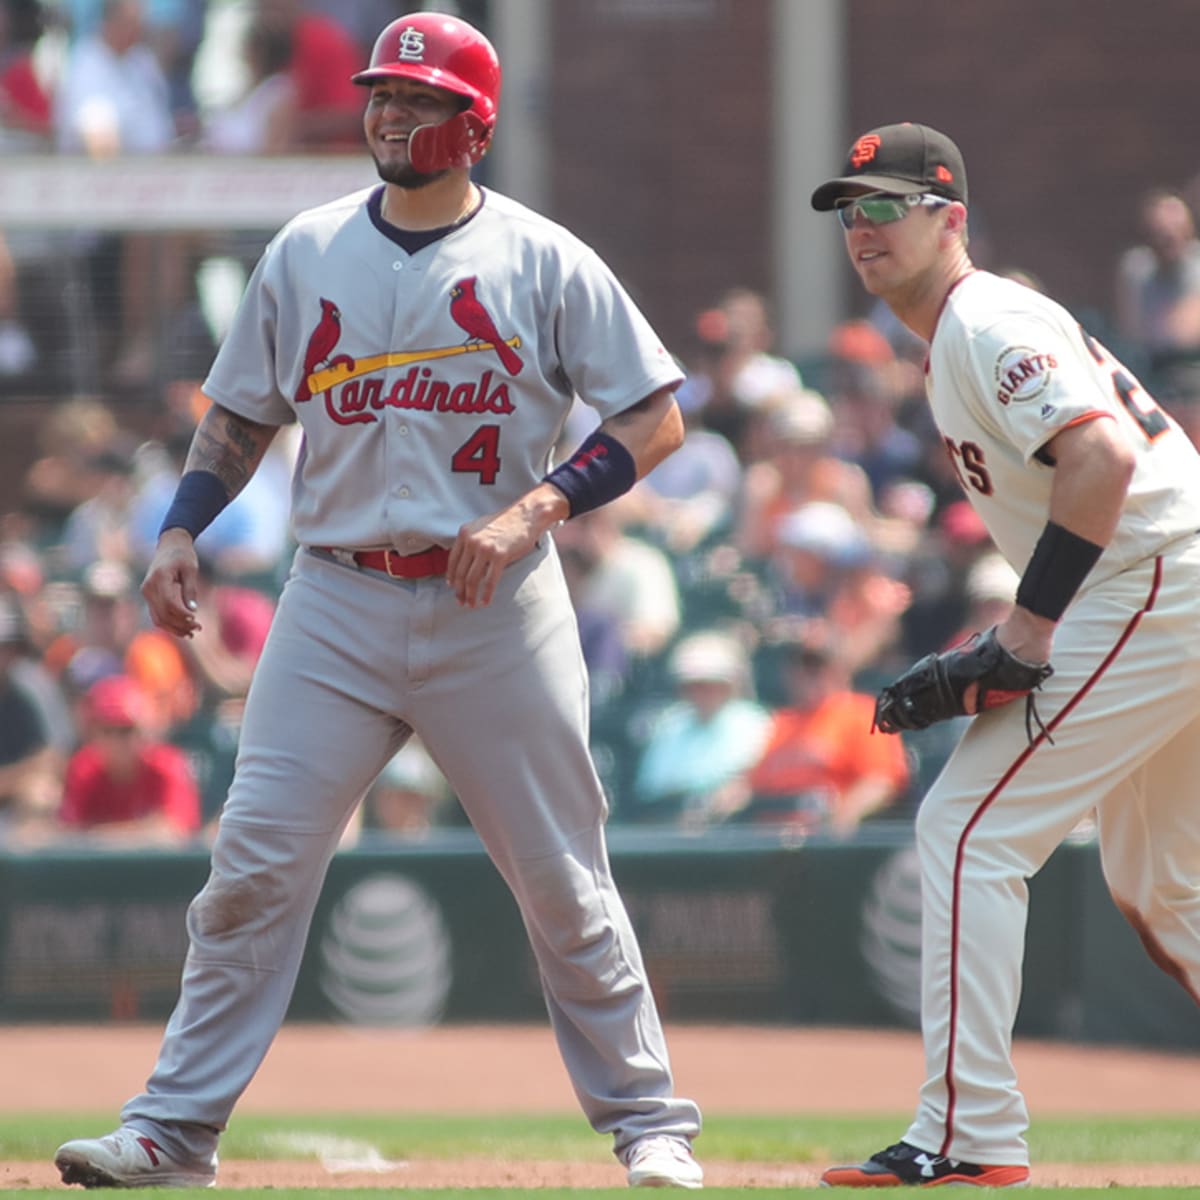 Who has a better legacy: Buster Posey or Yadier Molina?